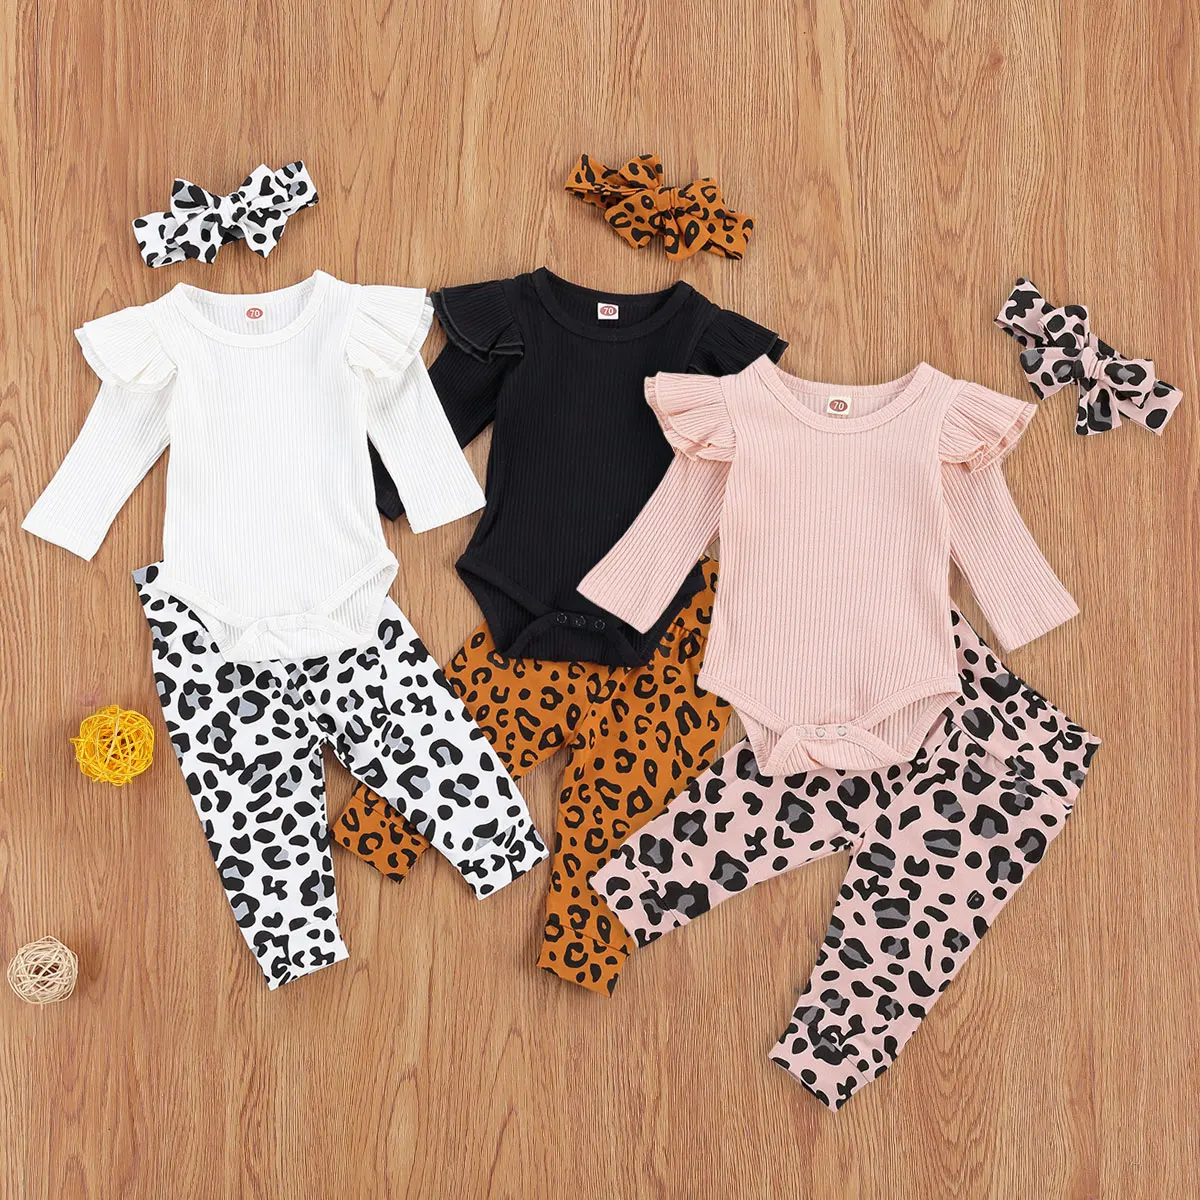 3Pcs-Set-Toddler-Baby-Girl-s-Fall-Clothes-Flying-Sleeve-Cotton-Long-Sleeve-Jumpsuit-Leopard-Trousers.jpg